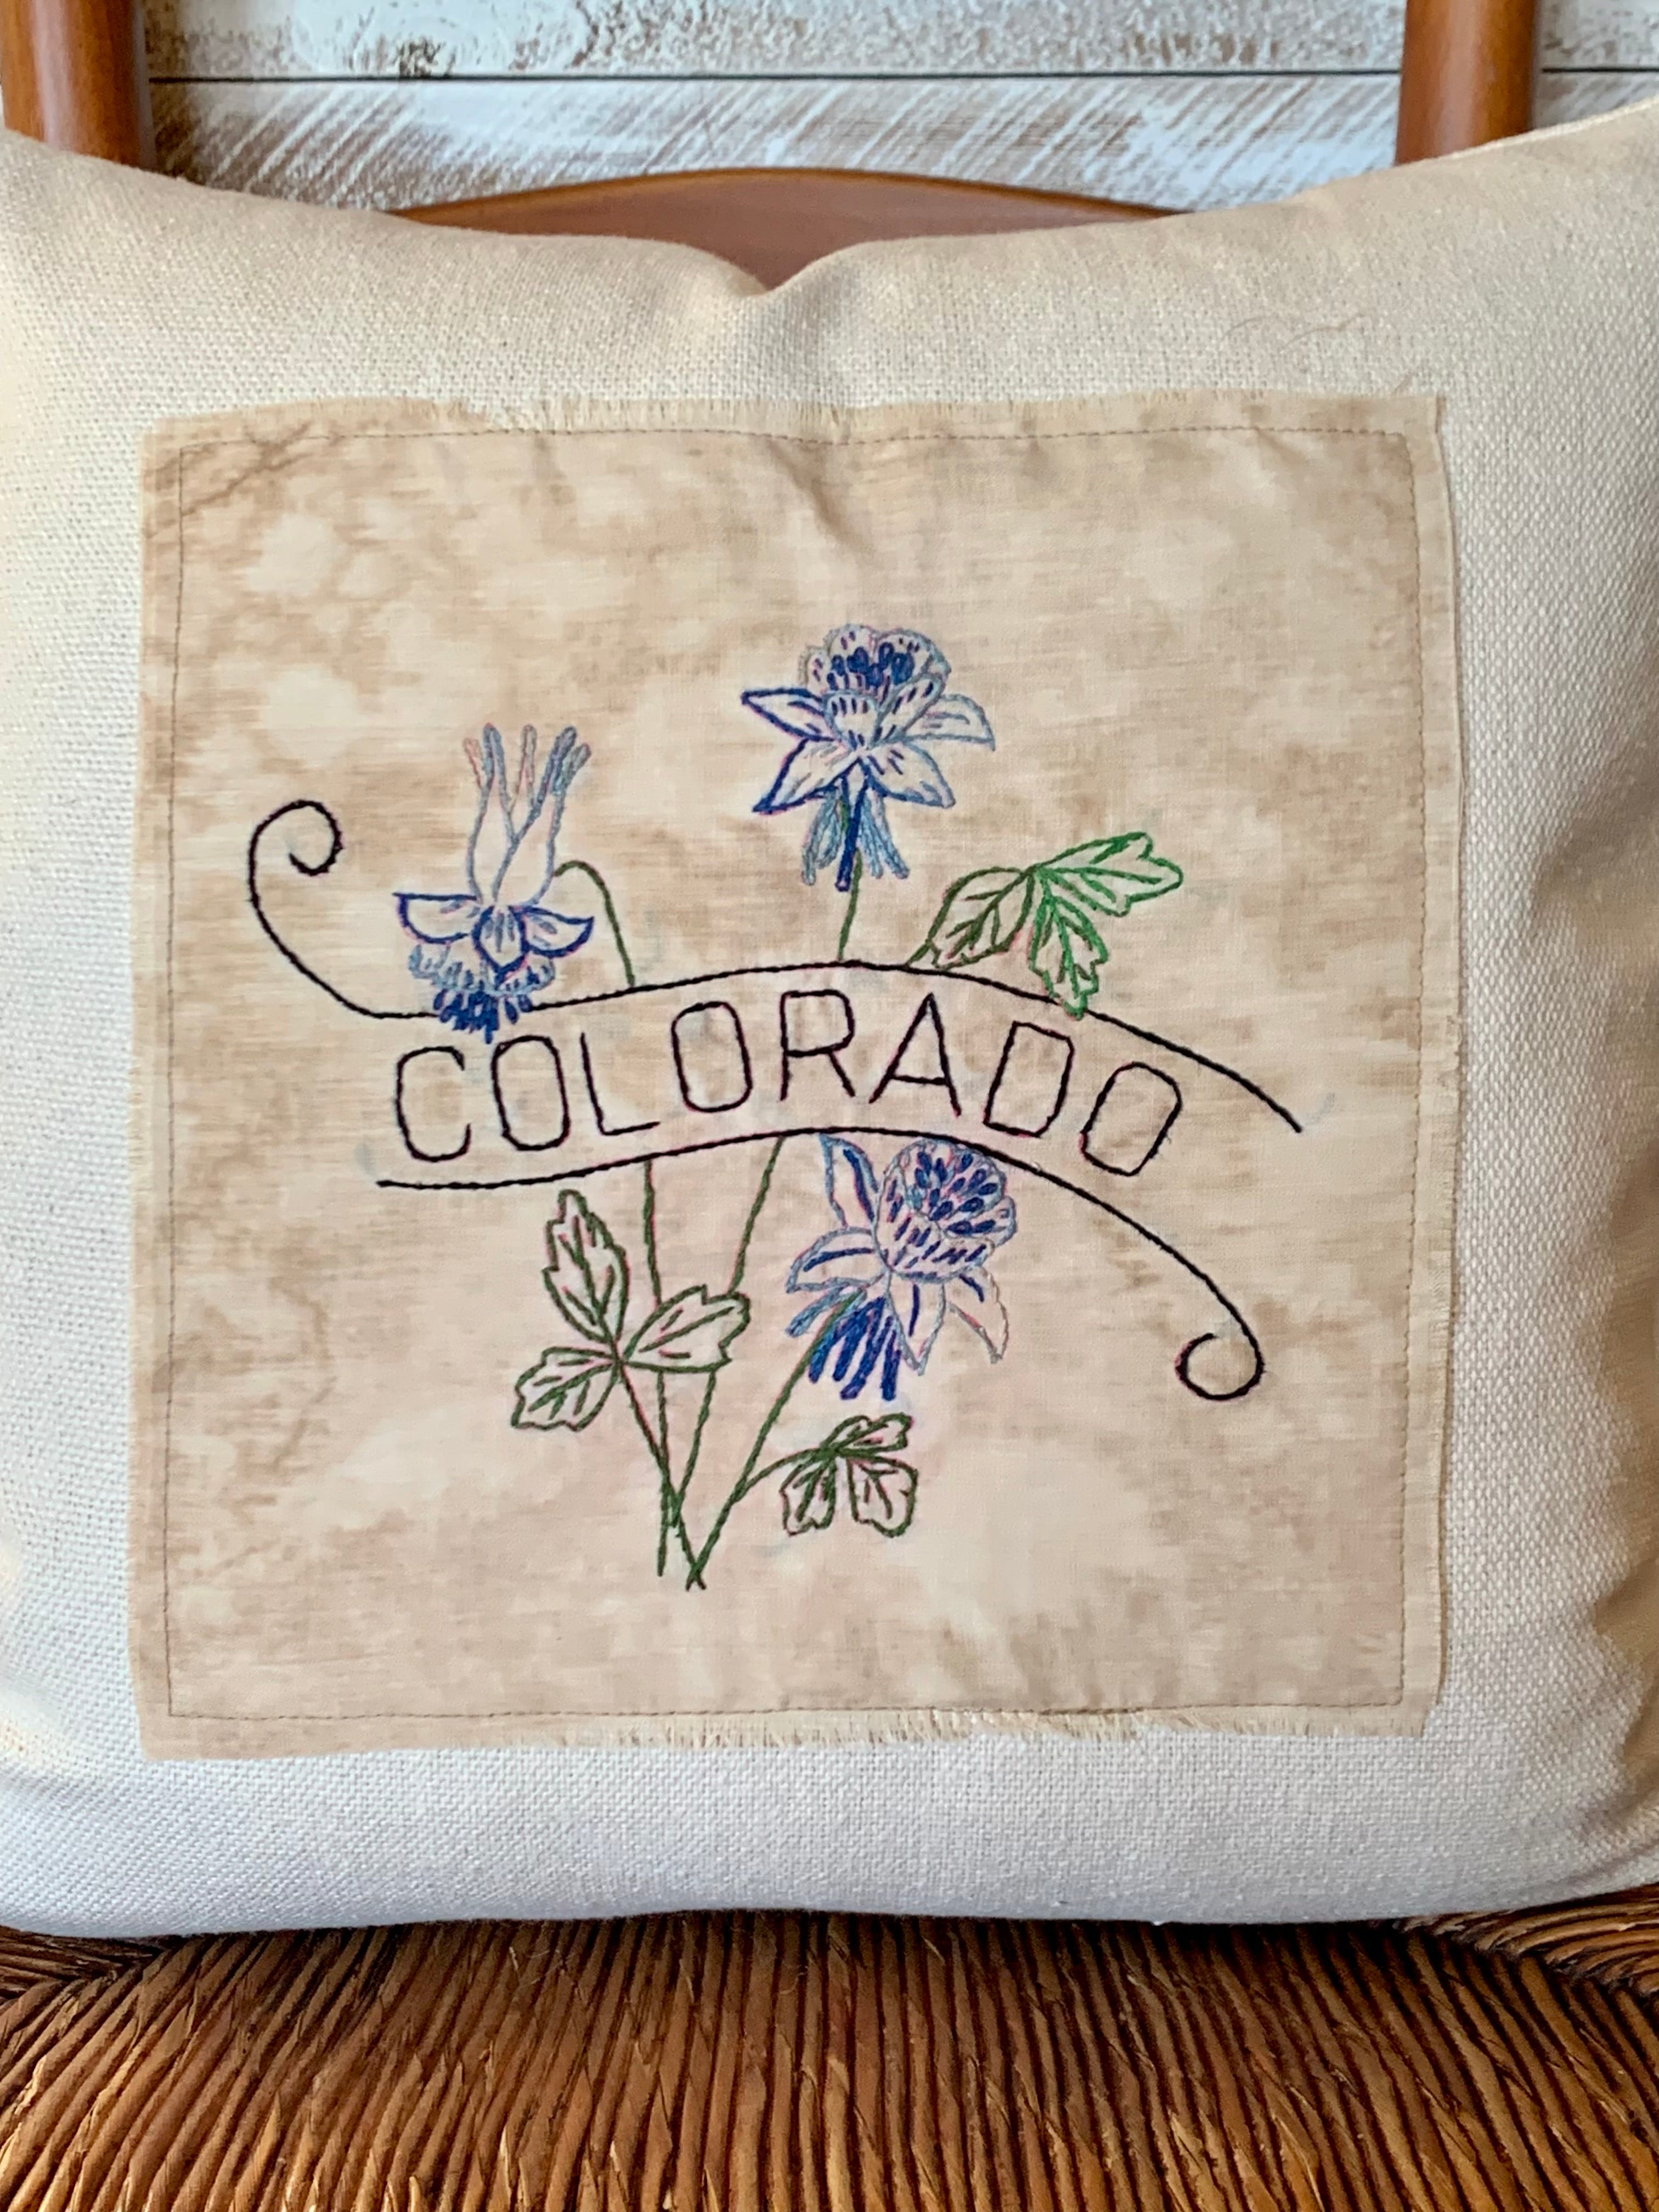 Colorado State Pillow - Embroidered